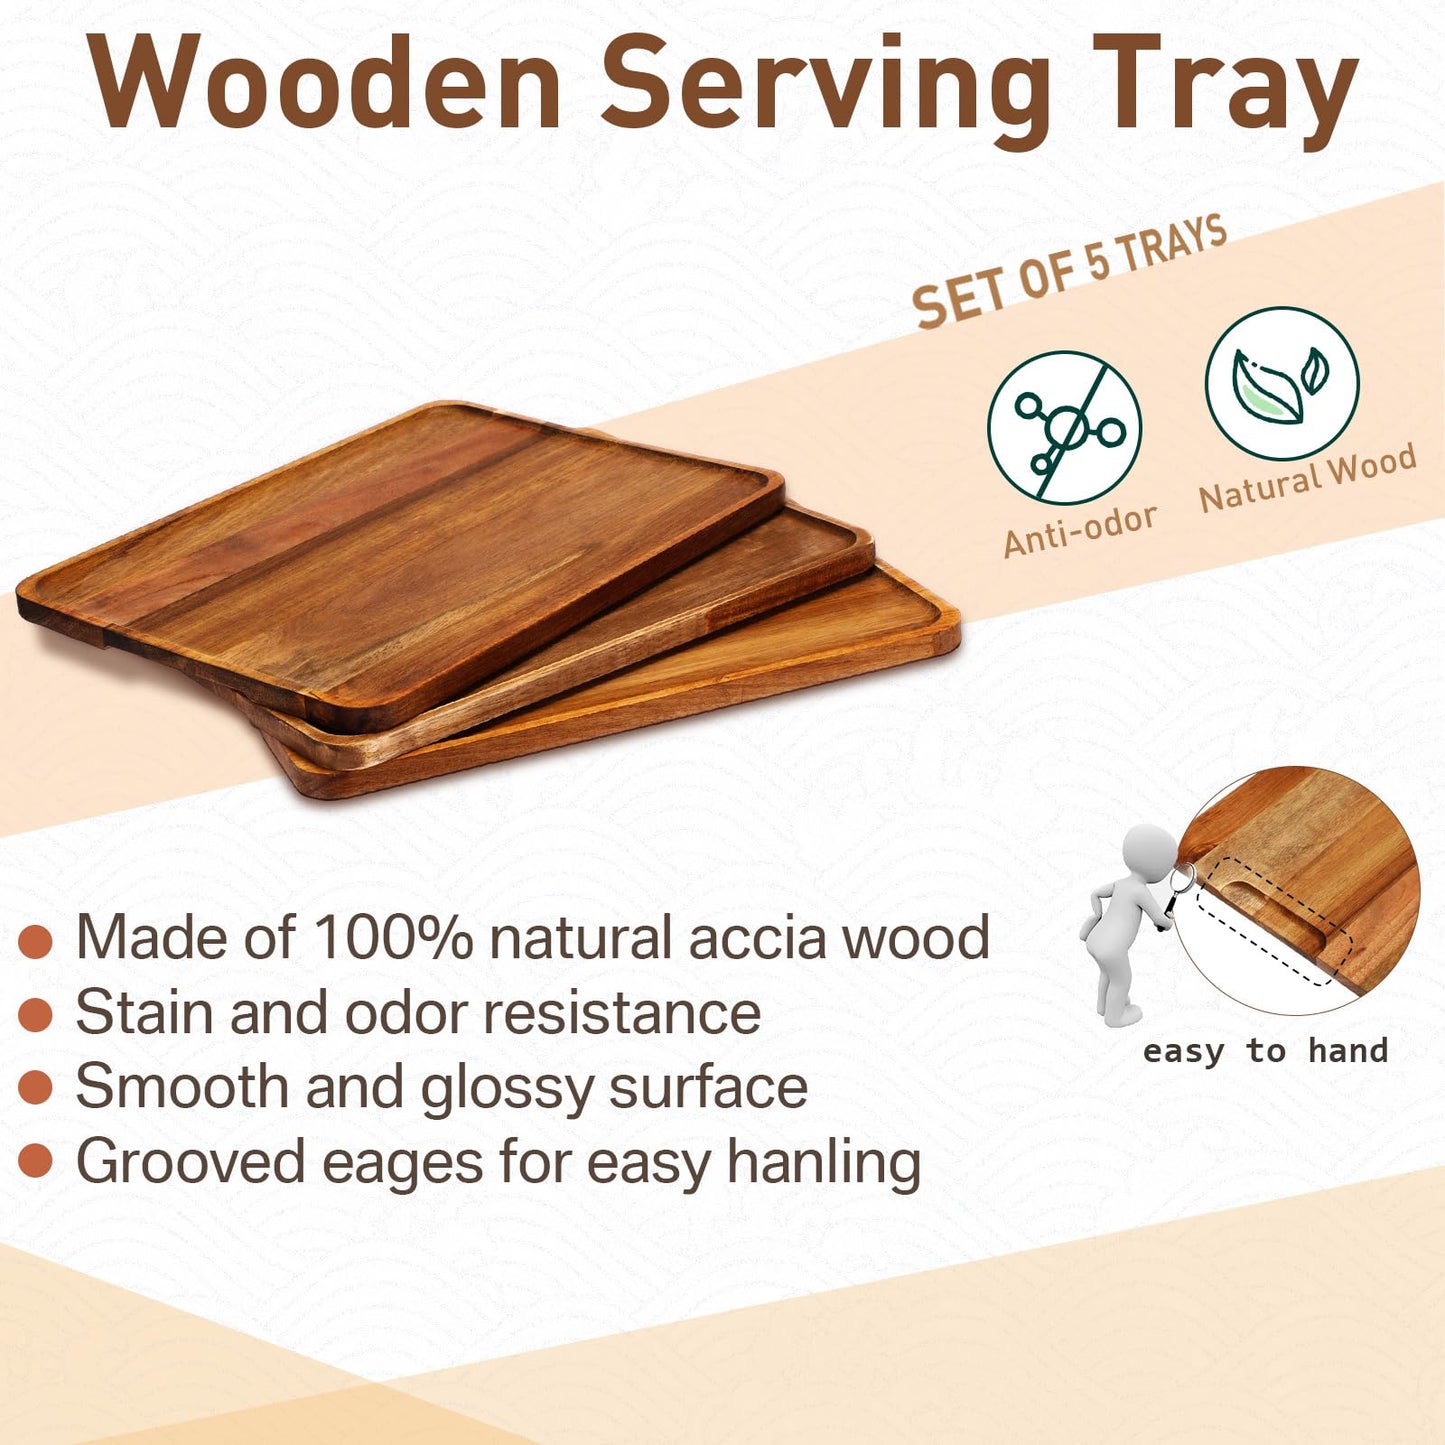 5 Pack Solid Acacia Wood Serving Trays, Rectangular Wooden Serving Board for Food Appetizer Serving Tray Plates for Vegetables Fruit Charcuterie